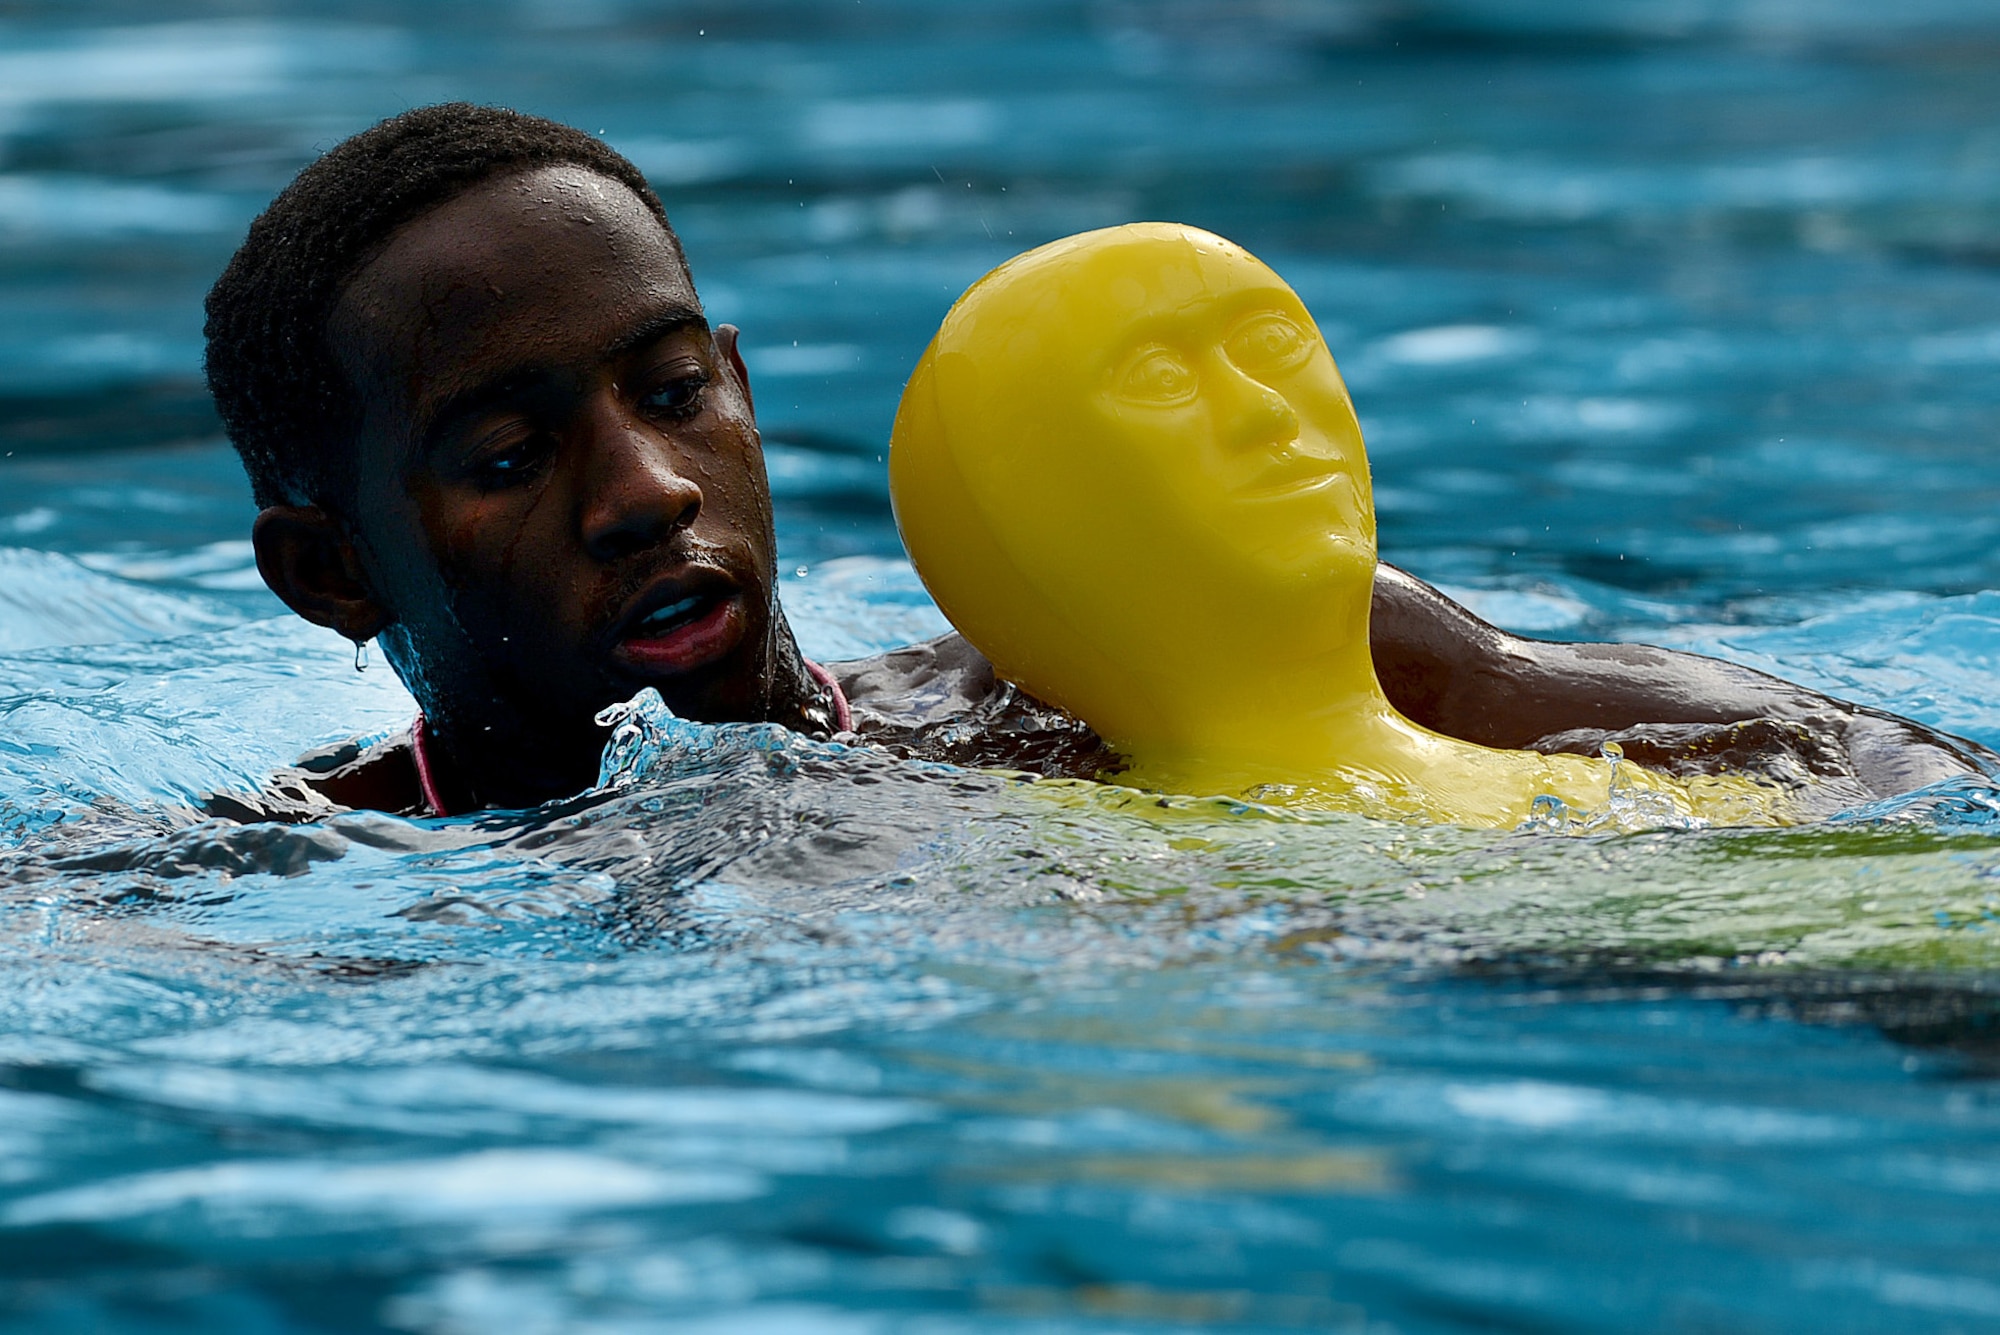 Darius Gibson, 20th Force Support Squadron lifeguard, rescues a mannequin from the pool and swims to safety during lifeguard training at the Woodland Pool, Shaw Air Force Base, S.C., July 15, 2015. Part of a lifeguard’s duty is to identify potential hazards, such as swimmers who struggle, show signs of heat exhaustion, or are behaving in an unsafe manner. (U.S. Air Force photo by Senior Airman Diana M. Cossaboom/Released)